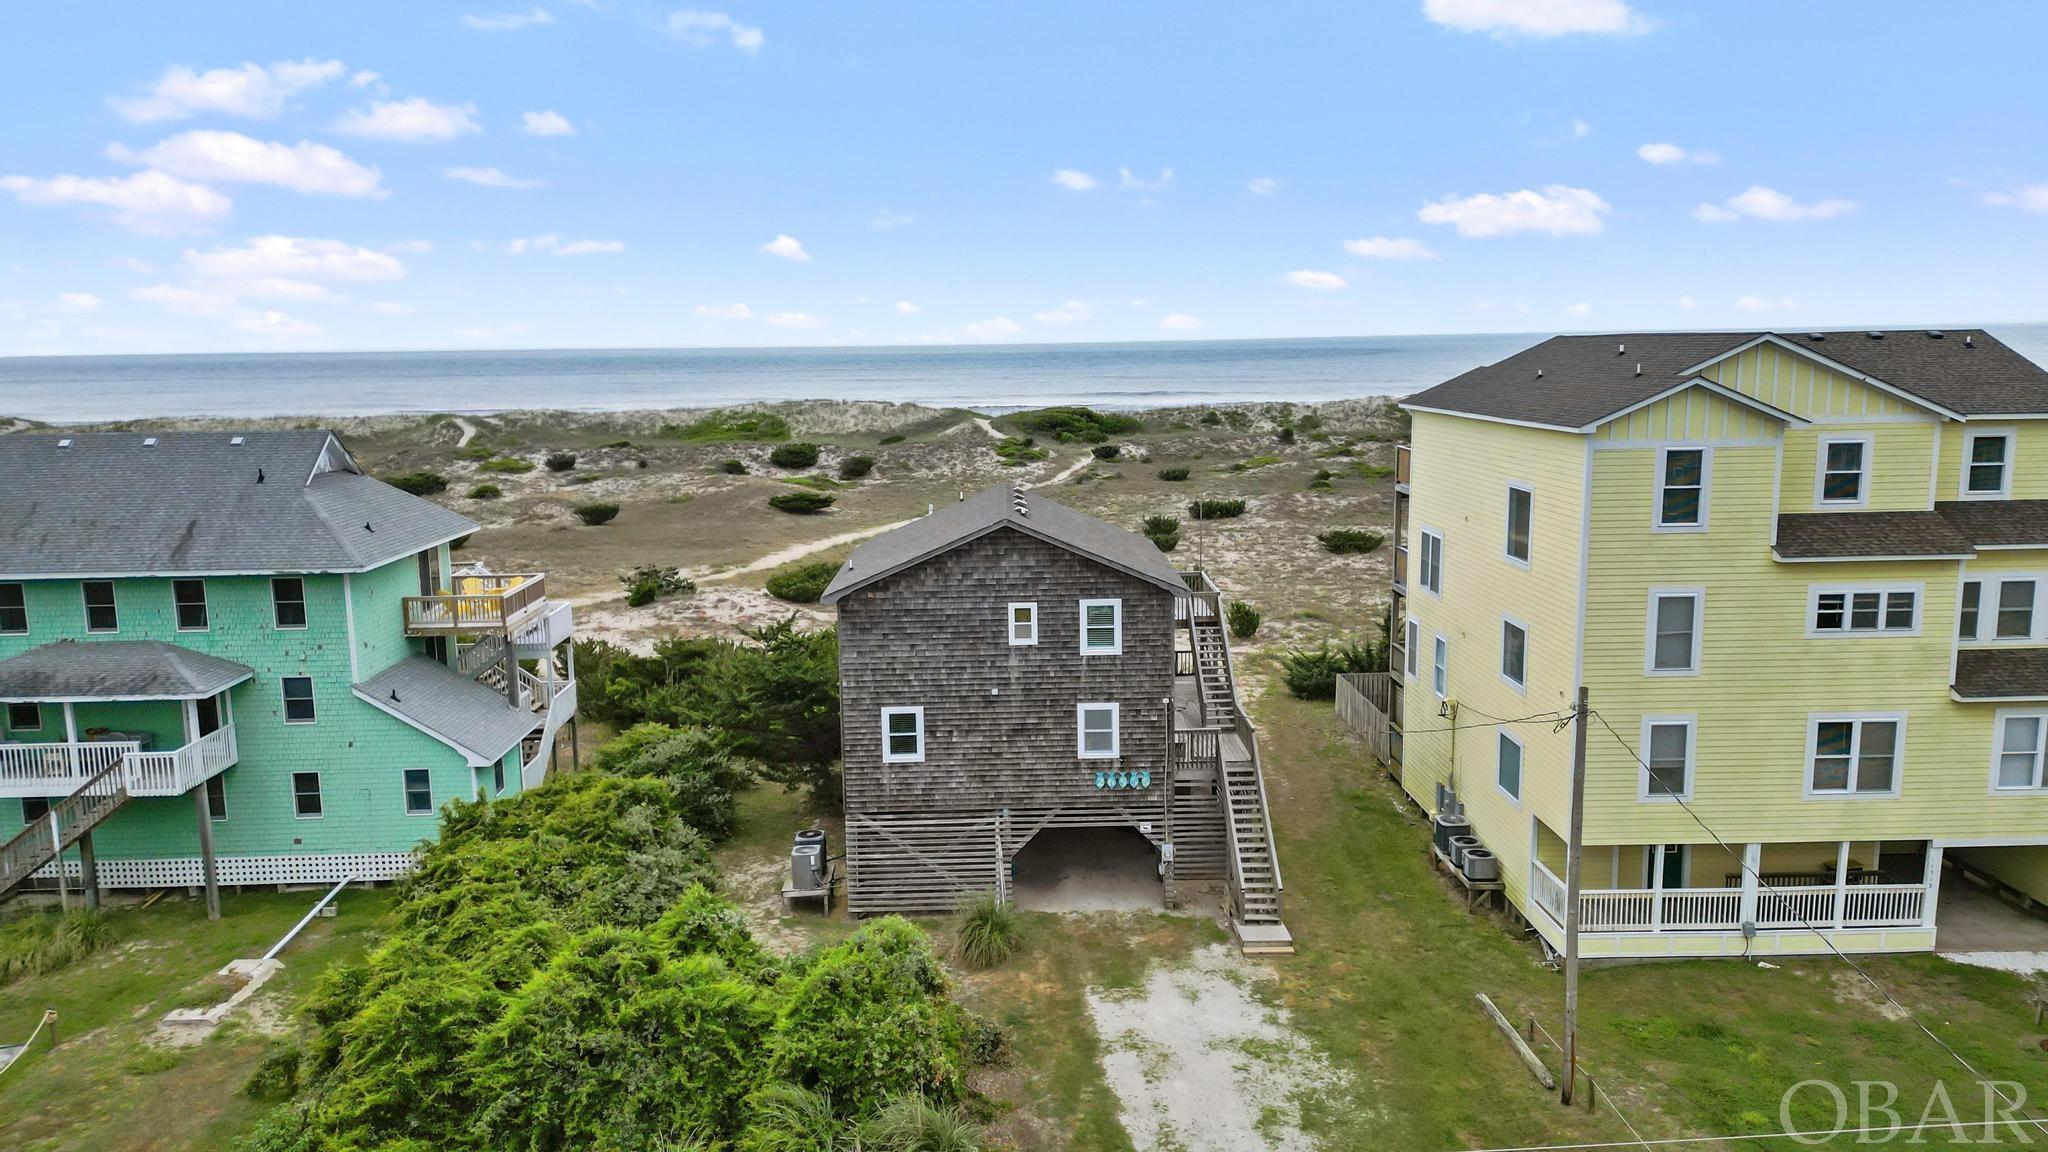 Welcome to your dream 80's turned beachy chic 2-story salt box on the Oceanfront in Salvo! "Always Remember" will captivate you as soon as you pull into the driveway. With its large & healthy dune line and ocean/seashore views for miles, you are sure to be instantly relaxed. Enter into the inviting foyer with access to all four bedrooms. One of which is a primary suite with access to ocean facing deck with Hot Tub. Three additional bedrooms on this level are comfortable and inviting with the stylish and fresh decor. Second level embraces the beautiful ocean views outside dual sliders. Large sundeck is perfect to catch those Summer Salvo sun rays. Newly updated kitchen features new cabinets 2023, new block counter tops 2023, ceramic tile backsplash 2023, and newer appliances. Newer LVP flooring makes it easy to clean up upon leaving your Haven. If you want a Vacation Home you will never forget, come and see "Always Remember"!